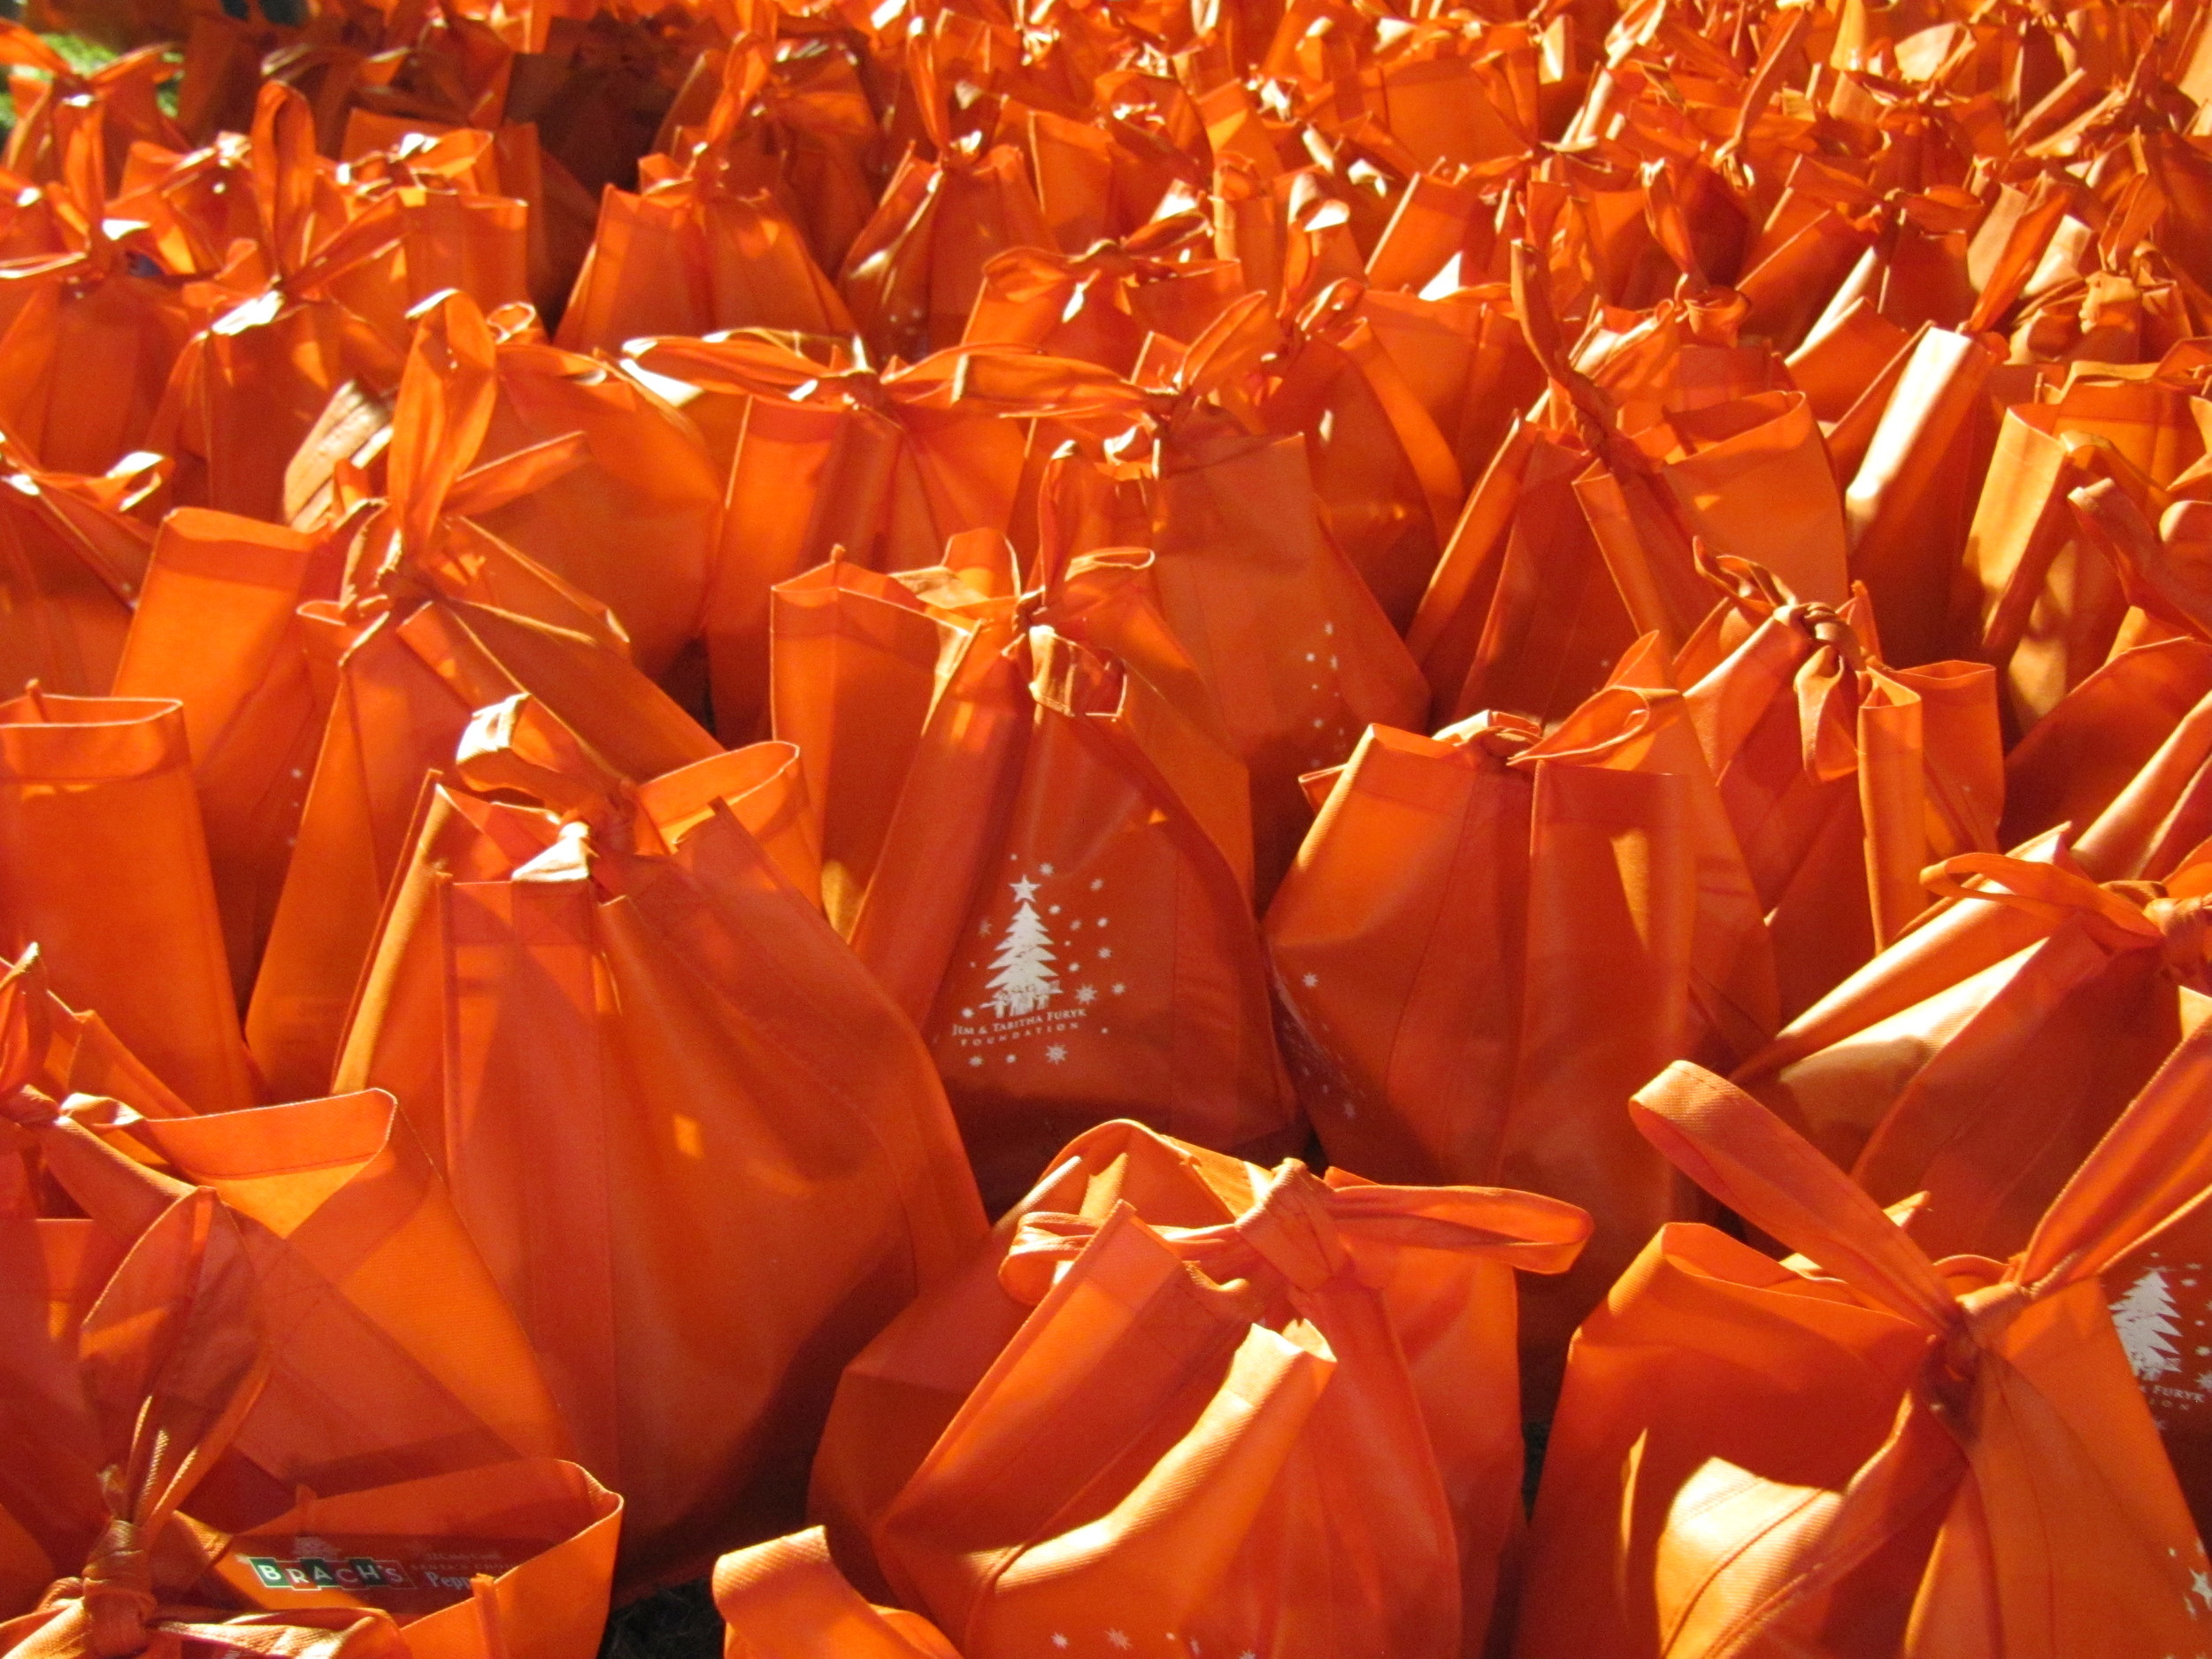 The sea of packed bags at Hope for the Holidays